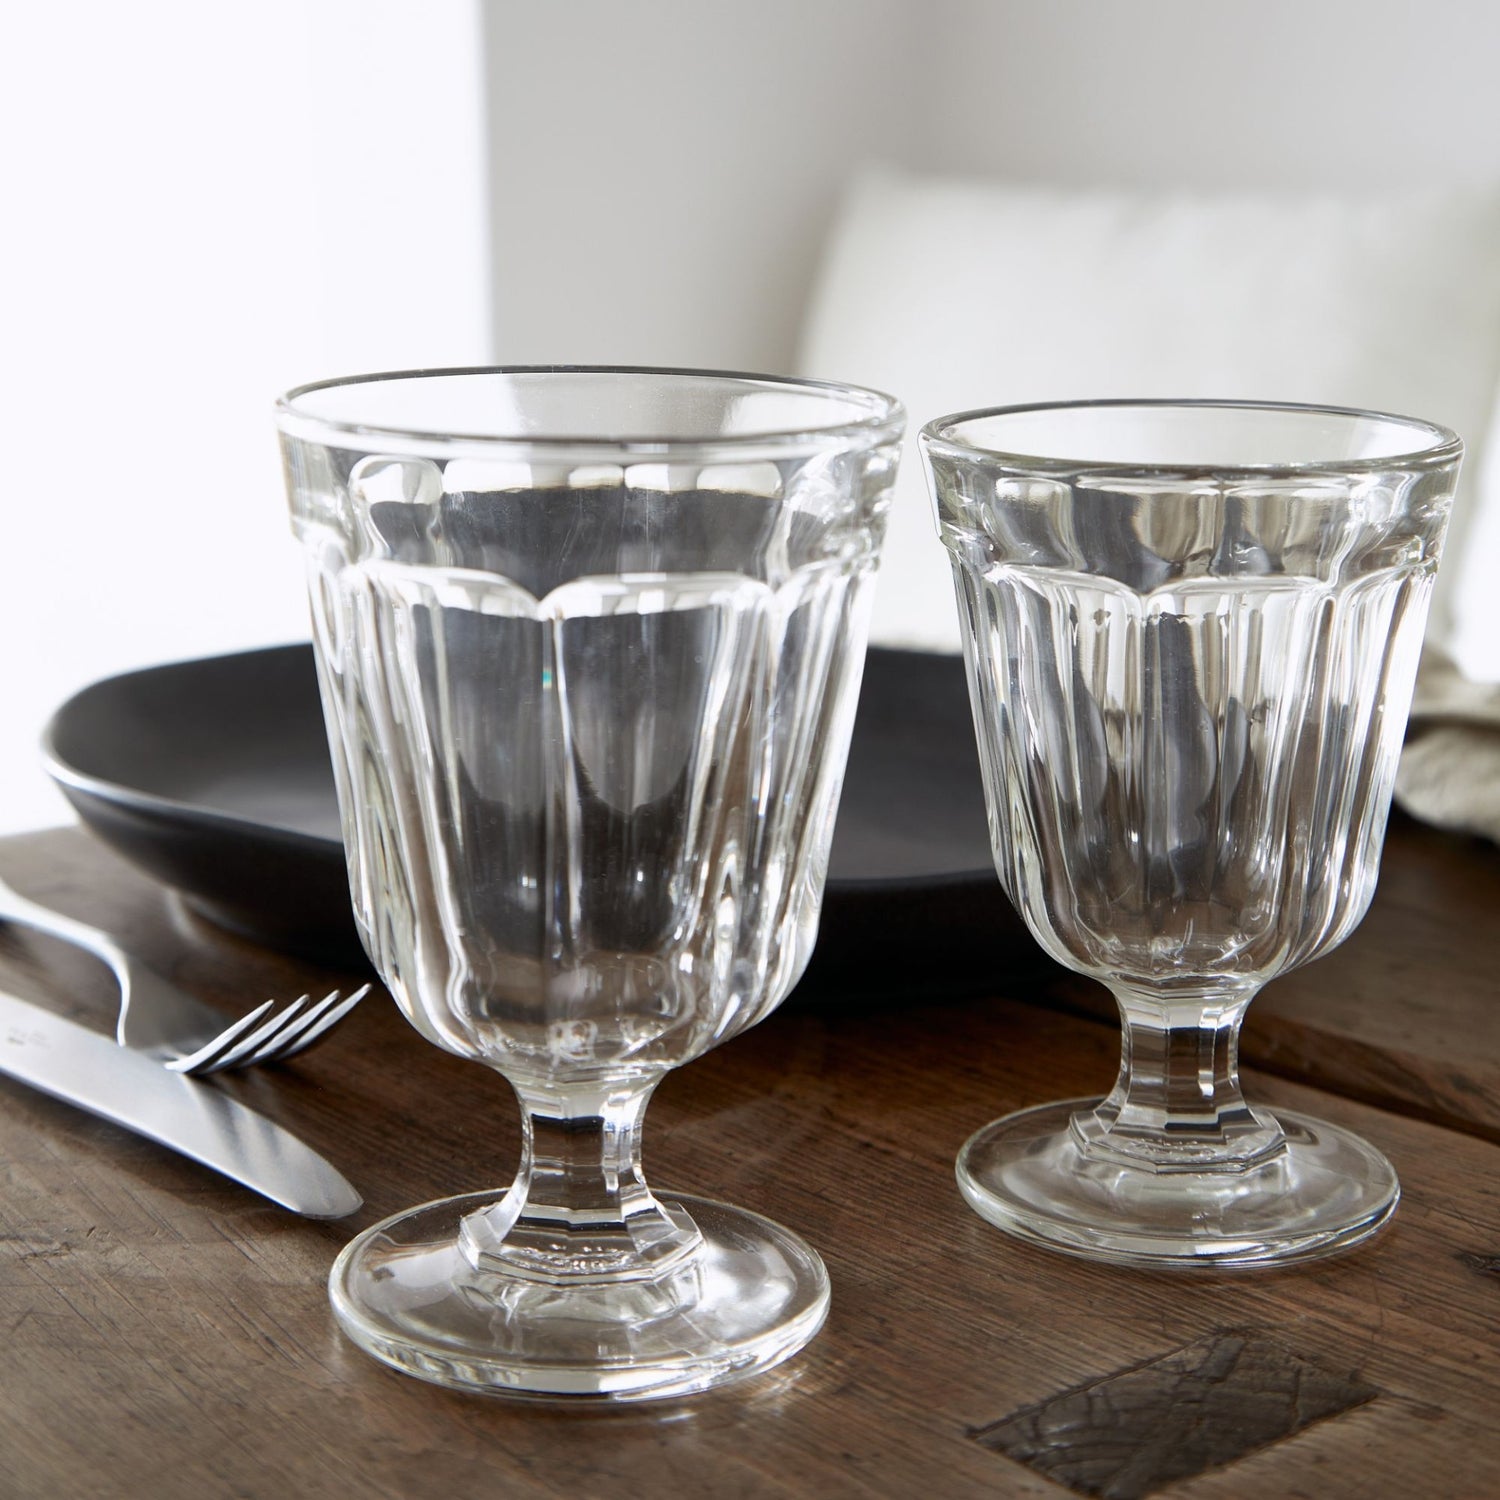 Two Casafina Living Gomos Water Glasses on a wooden table.